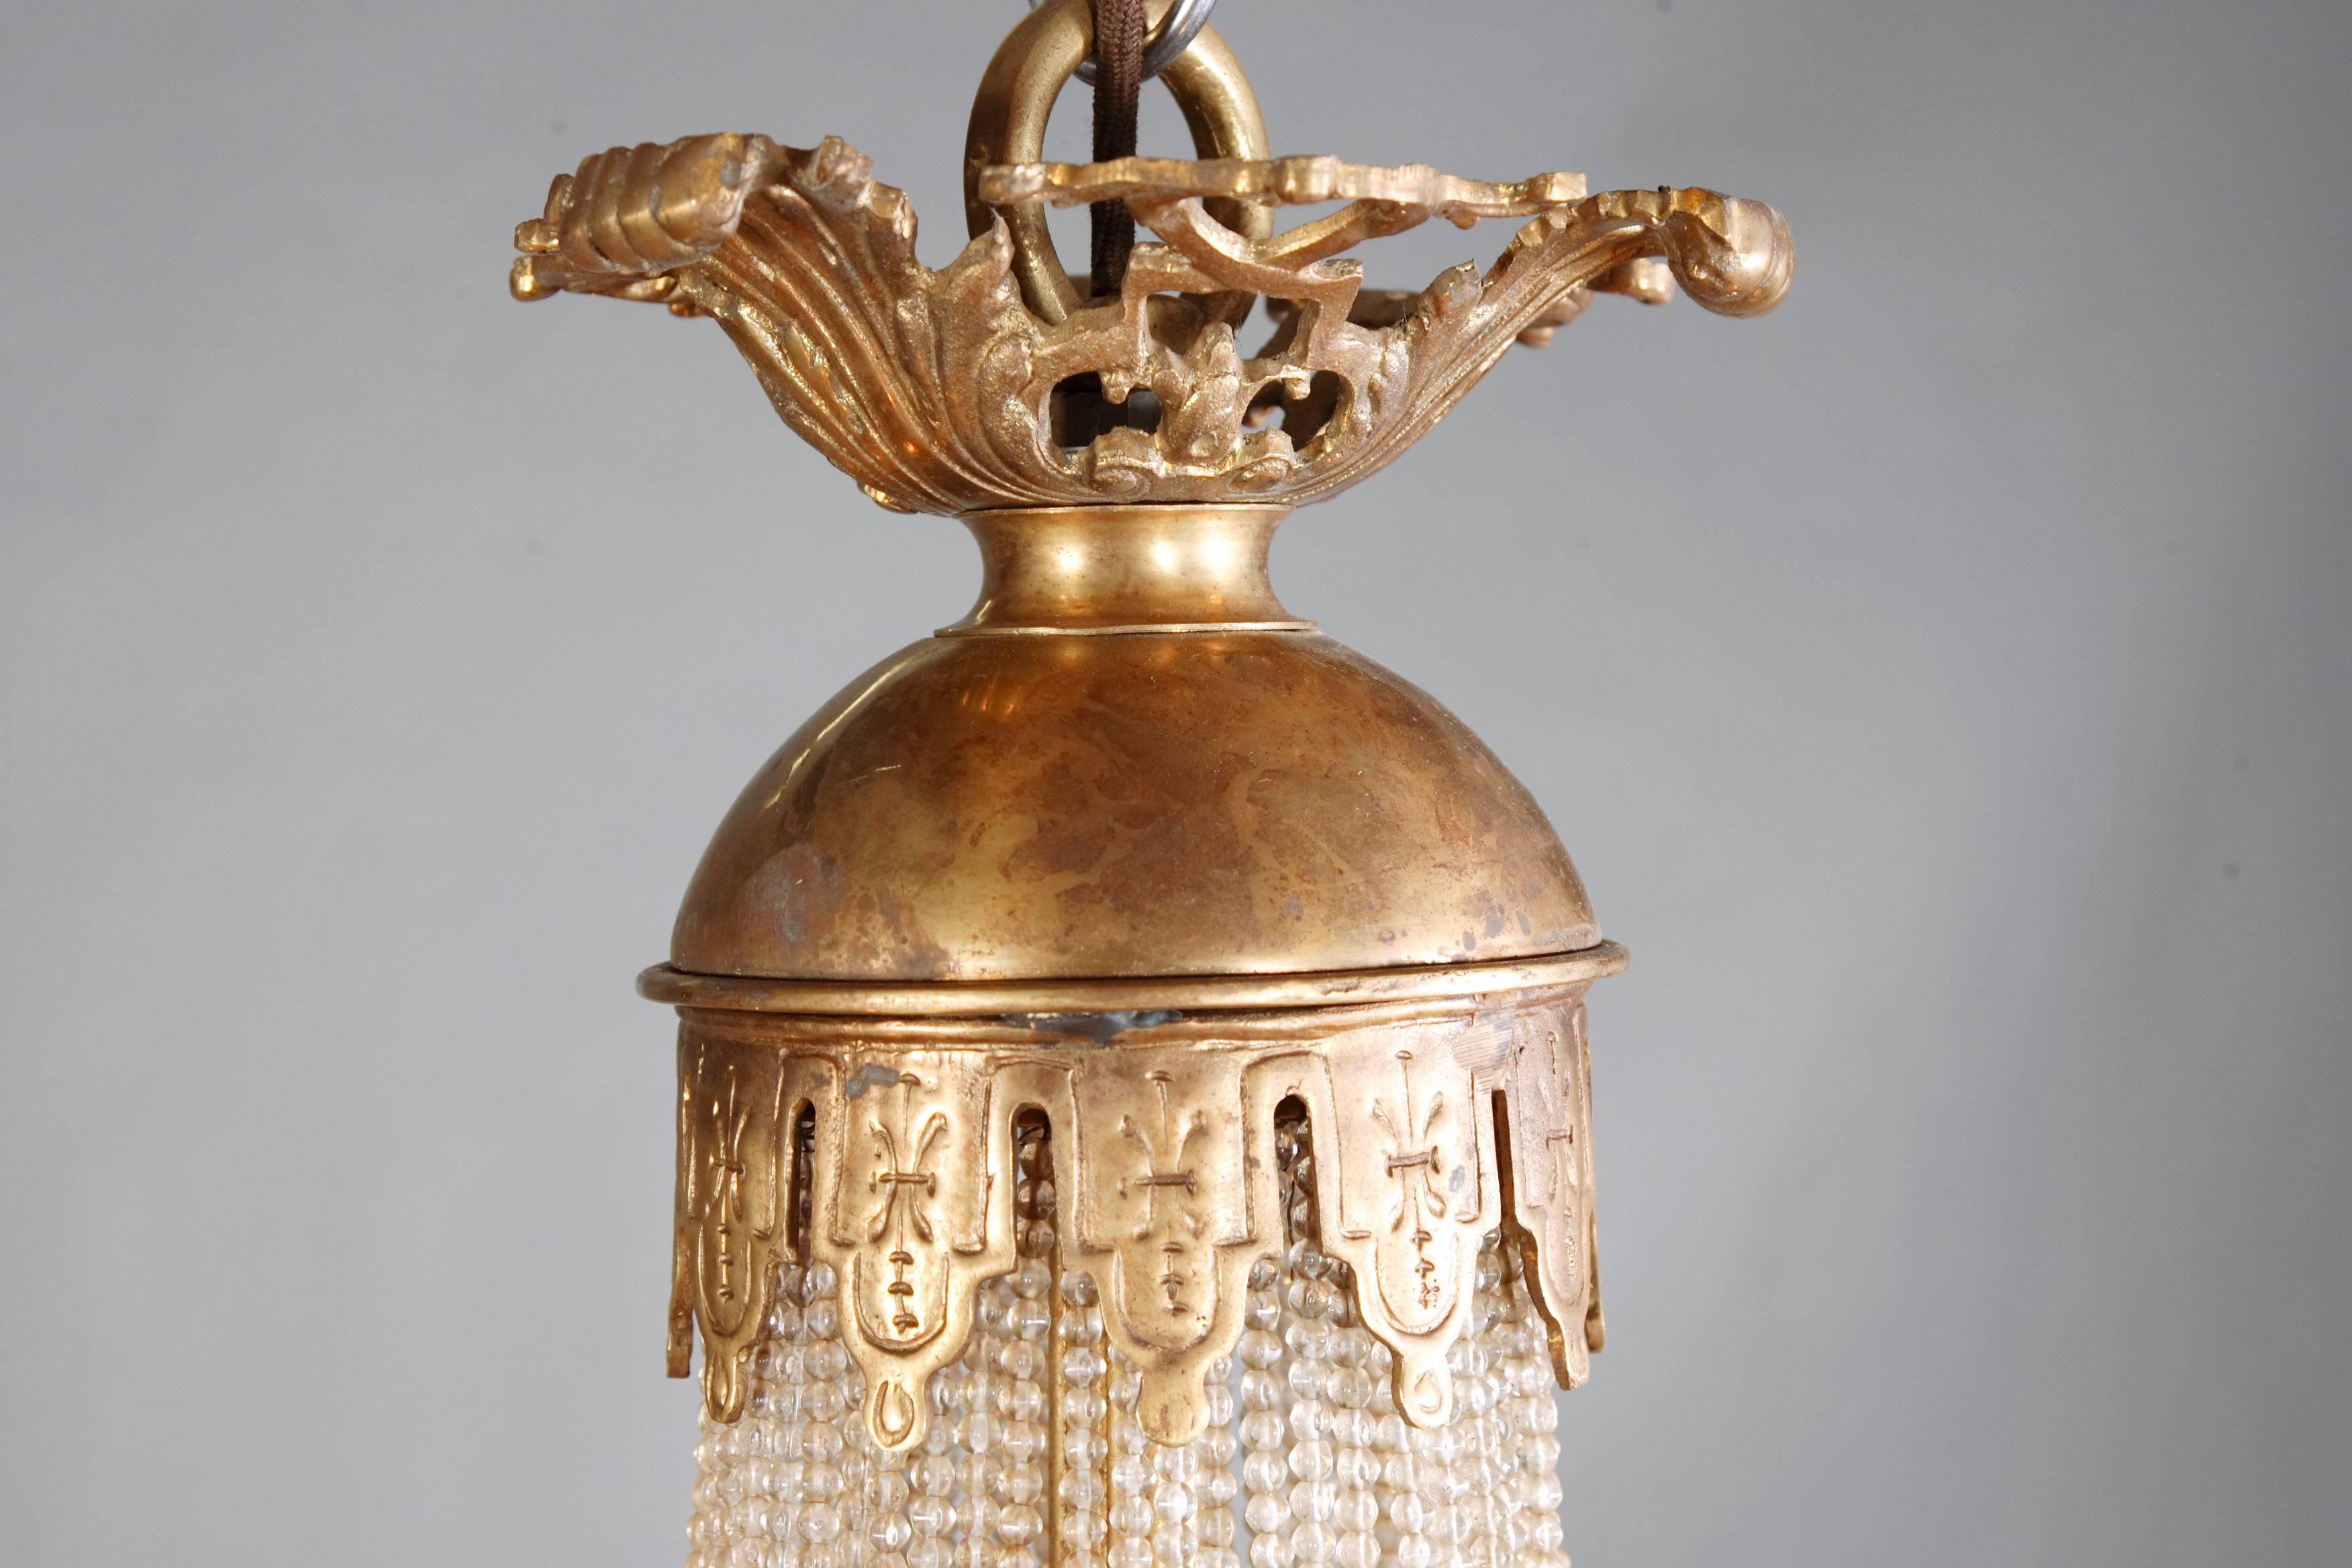 Majestic splendid chandelier in Empire style referred to Empress Joséphine. Exceptionally cine, engraved and cast Bronze. Basket-formed corpus from hand-cut Frenches ball prisms . Connected through wide, mythological ornamental reliefed and broken